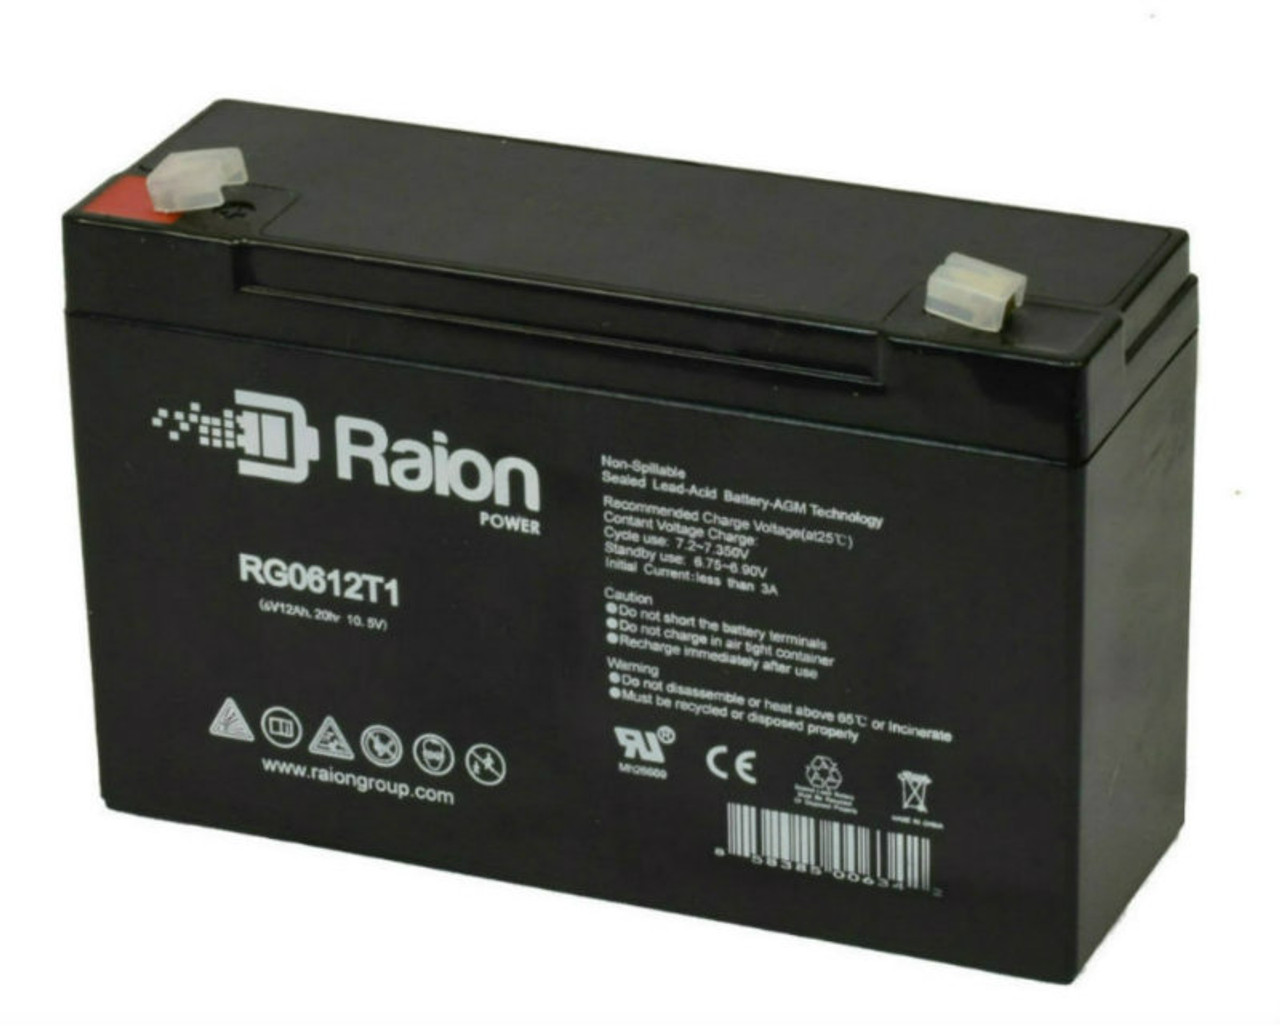 Raion Power RG06120T1 Replacement Battery for Teledyne 118-0023